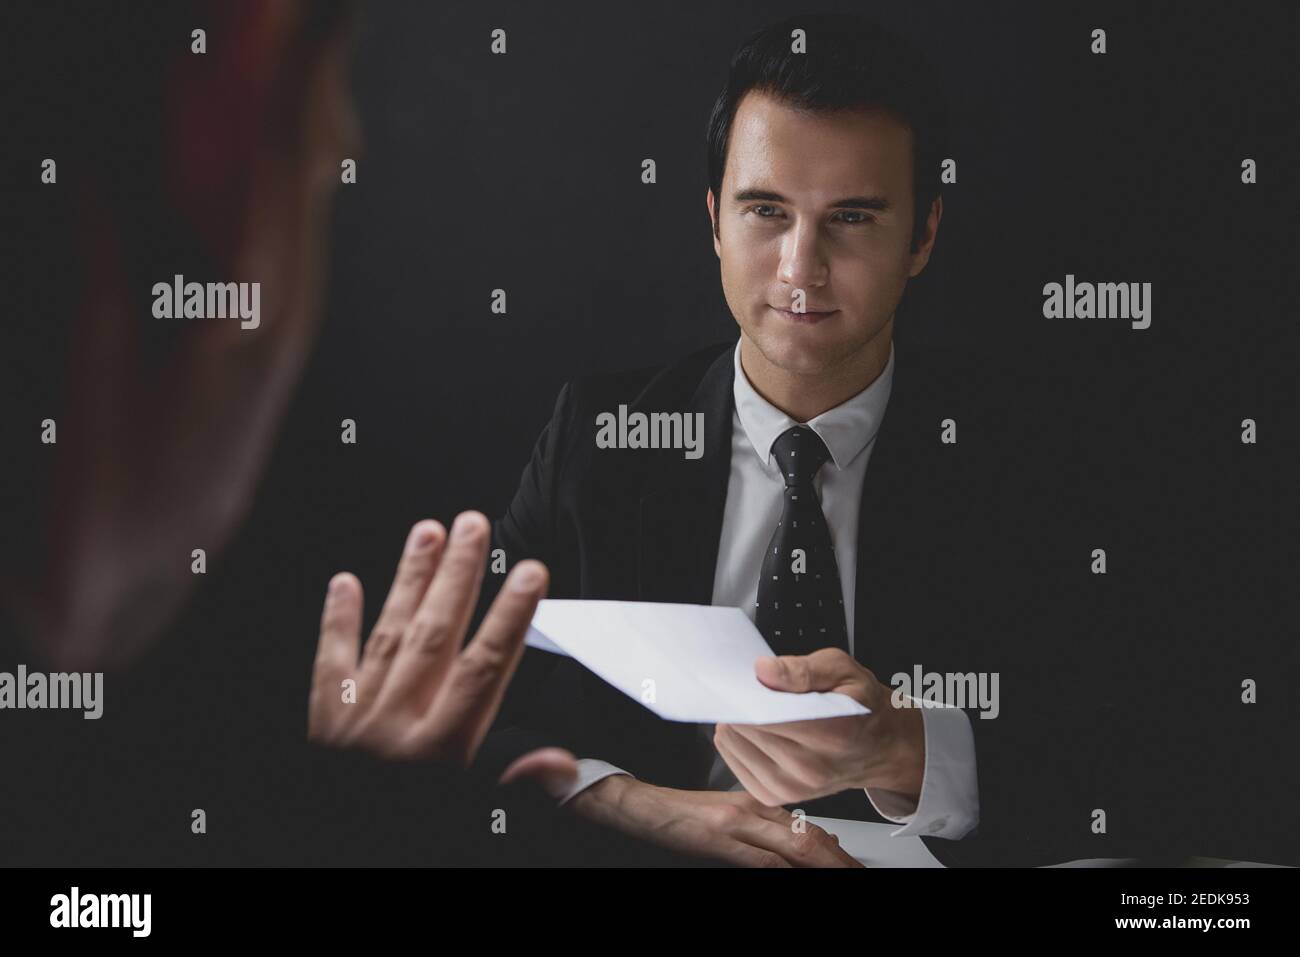 Businessman rejecting money in white envelope offered by his partner in shadow, anti bribery and corruption concept Stock Photo